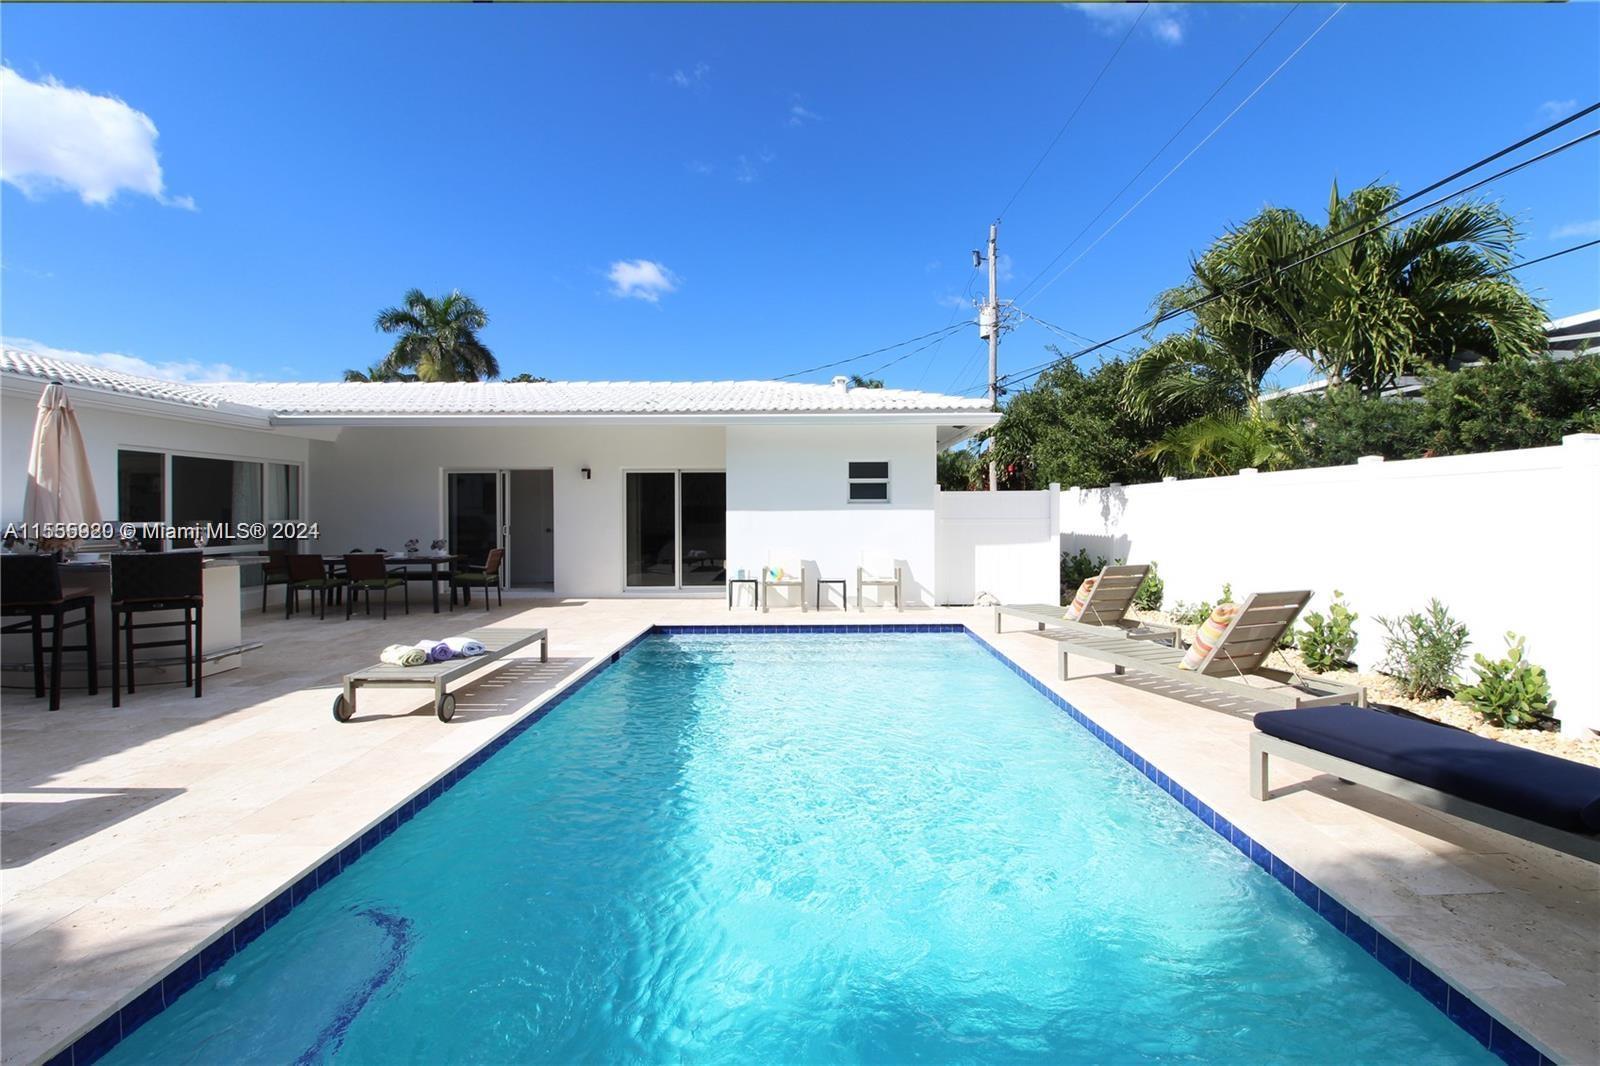 Photo of 233 Oceanic Ave in Lauderdale By The Sea, FL